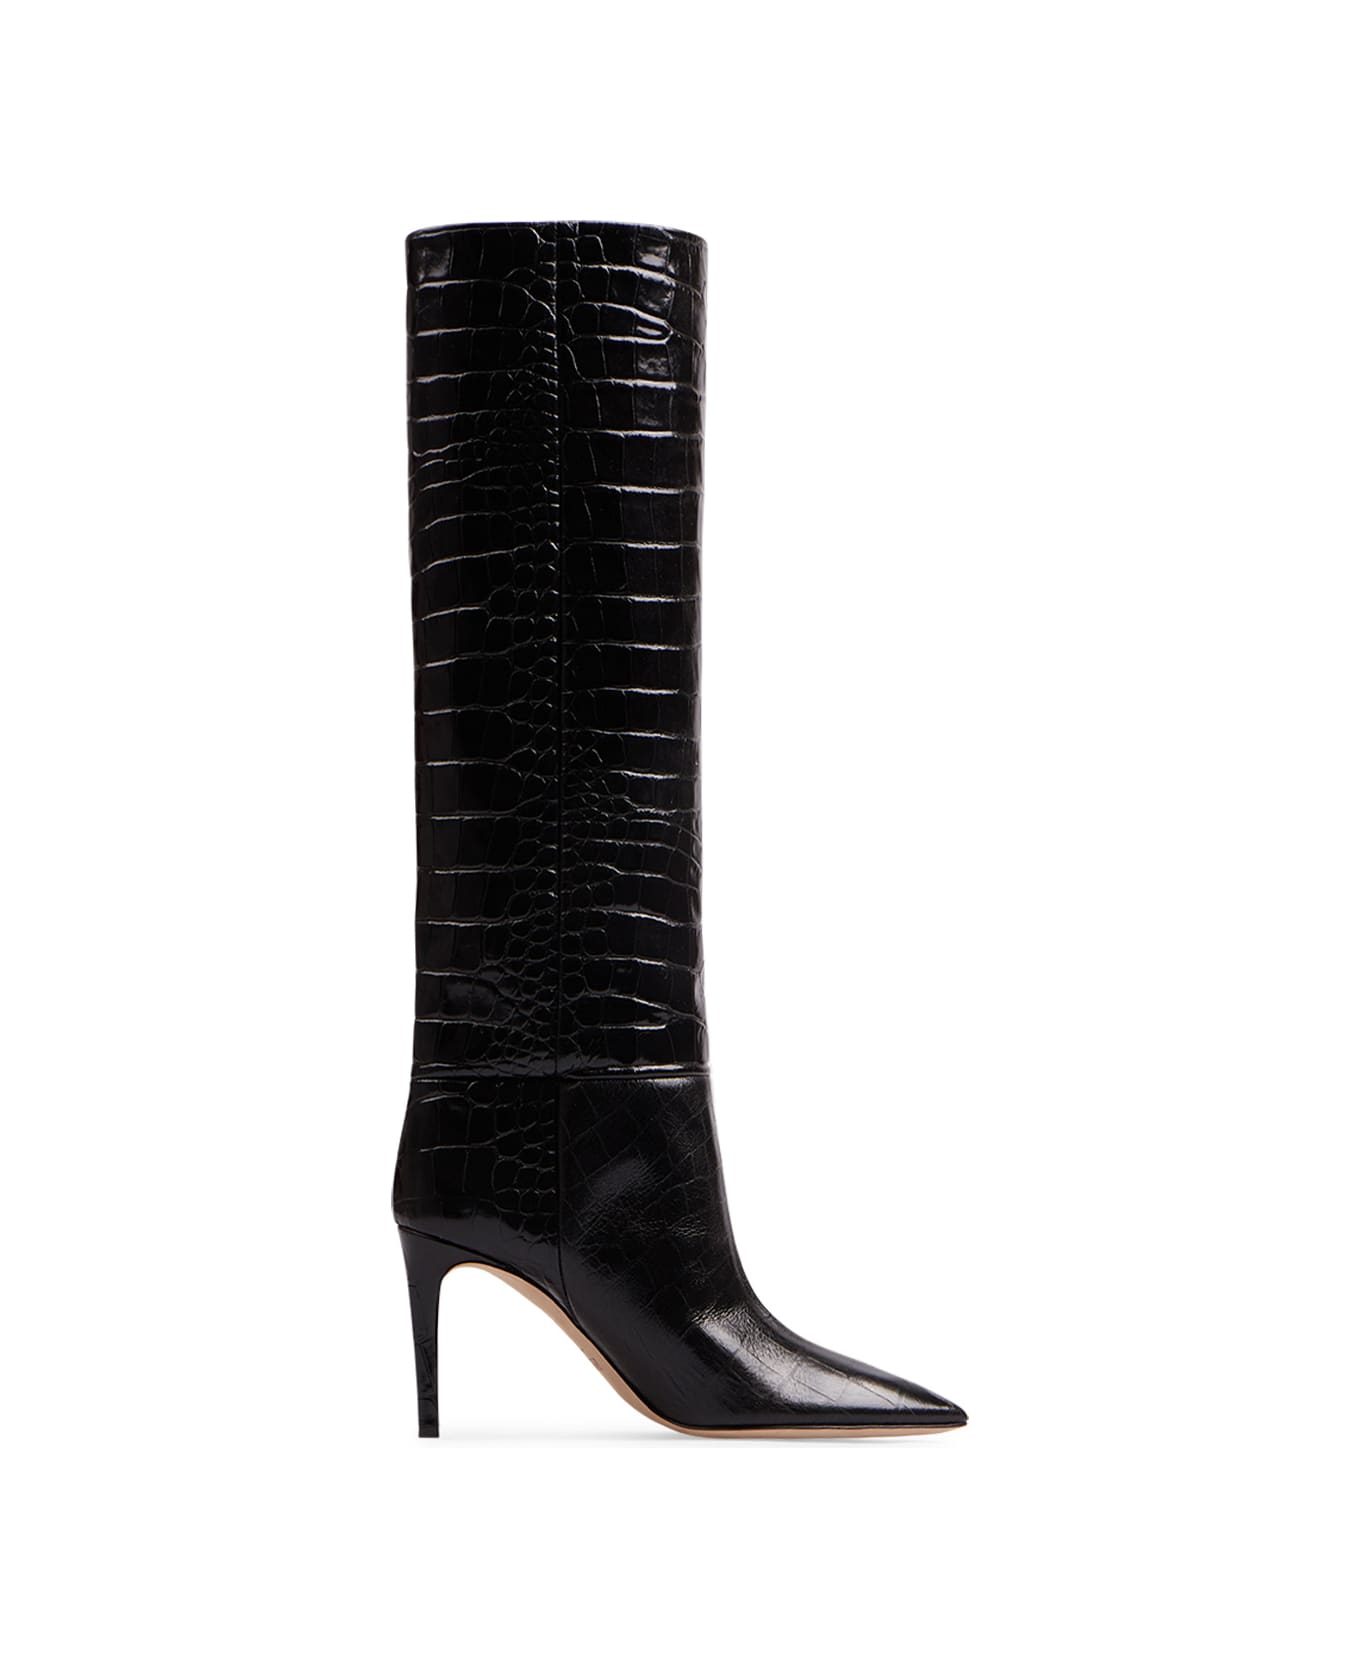 Paris Texas Charcoal Leather Stiletto Boots With Crocodile Print - Carbone